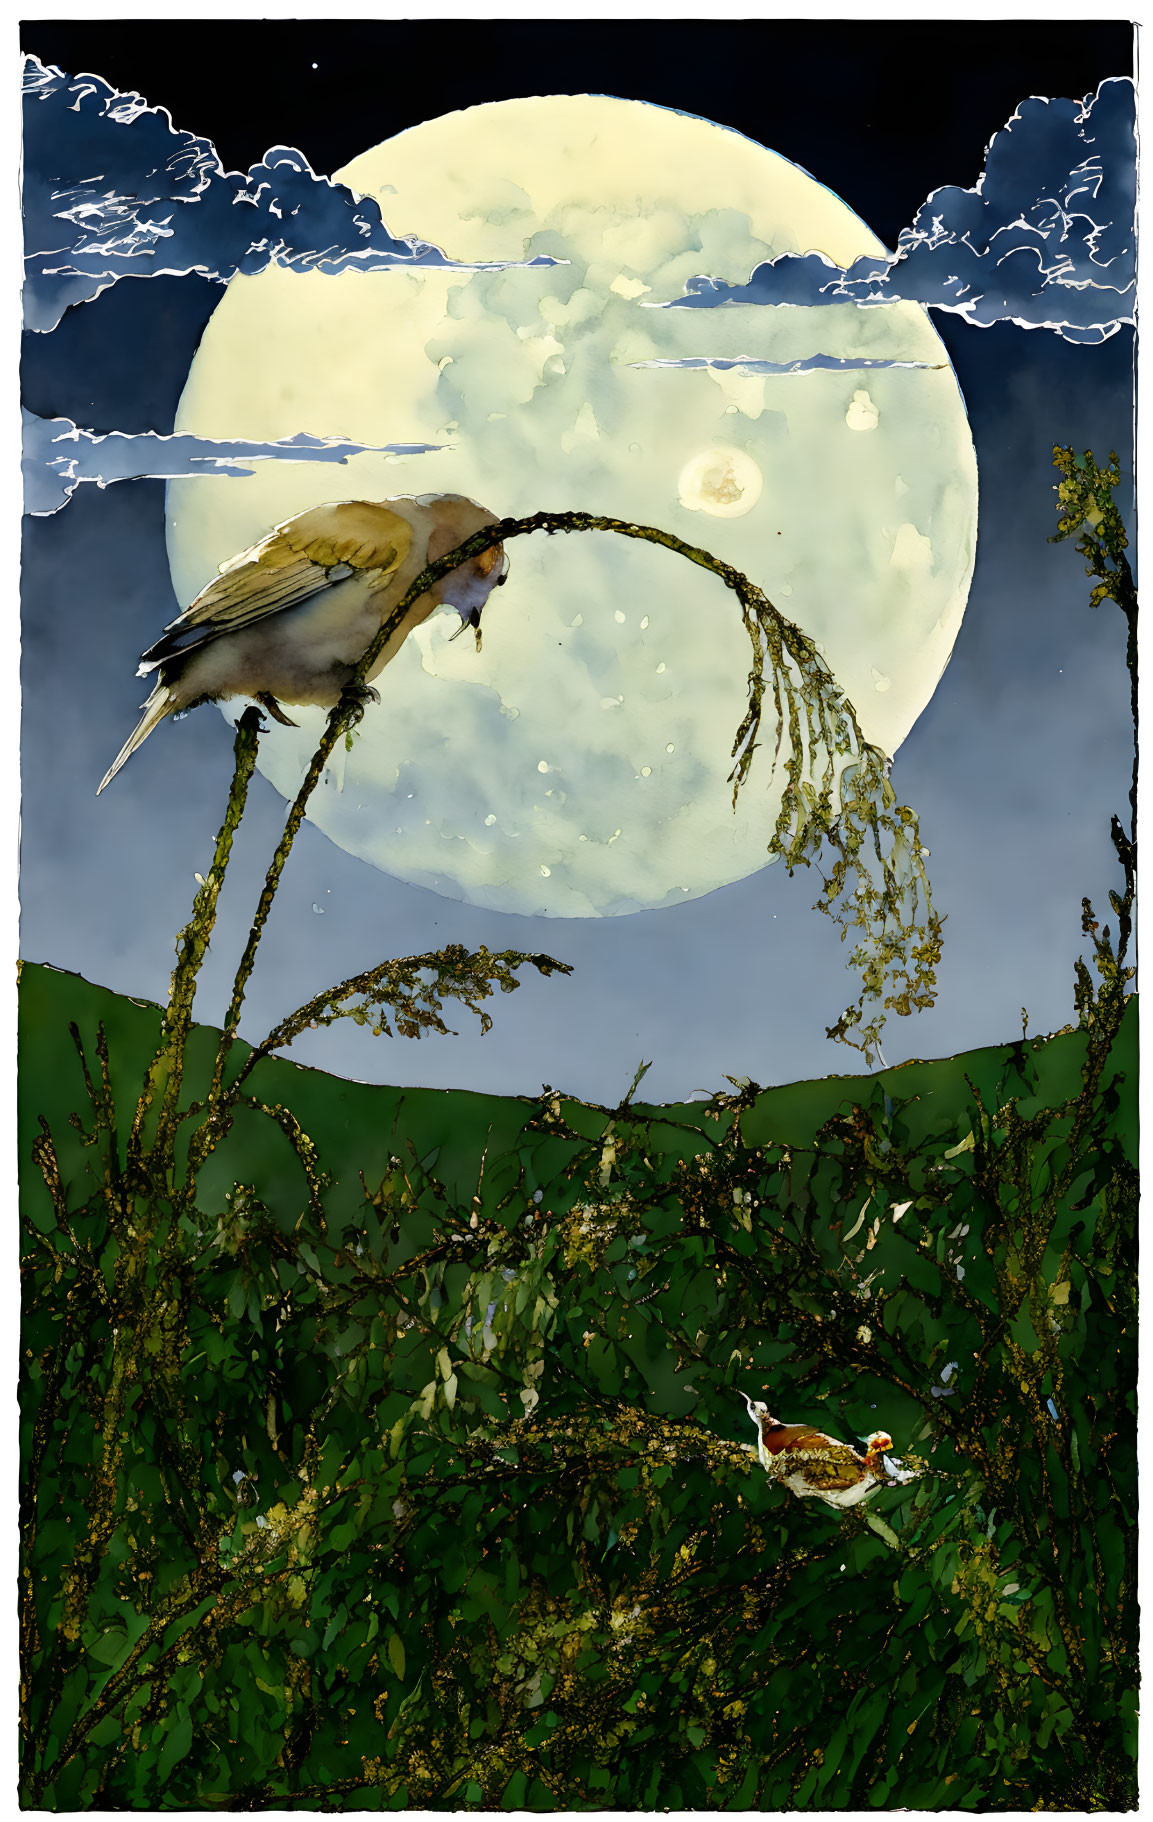 Bird perches on bending plant under full moon, lush moonlit scene with another bird.